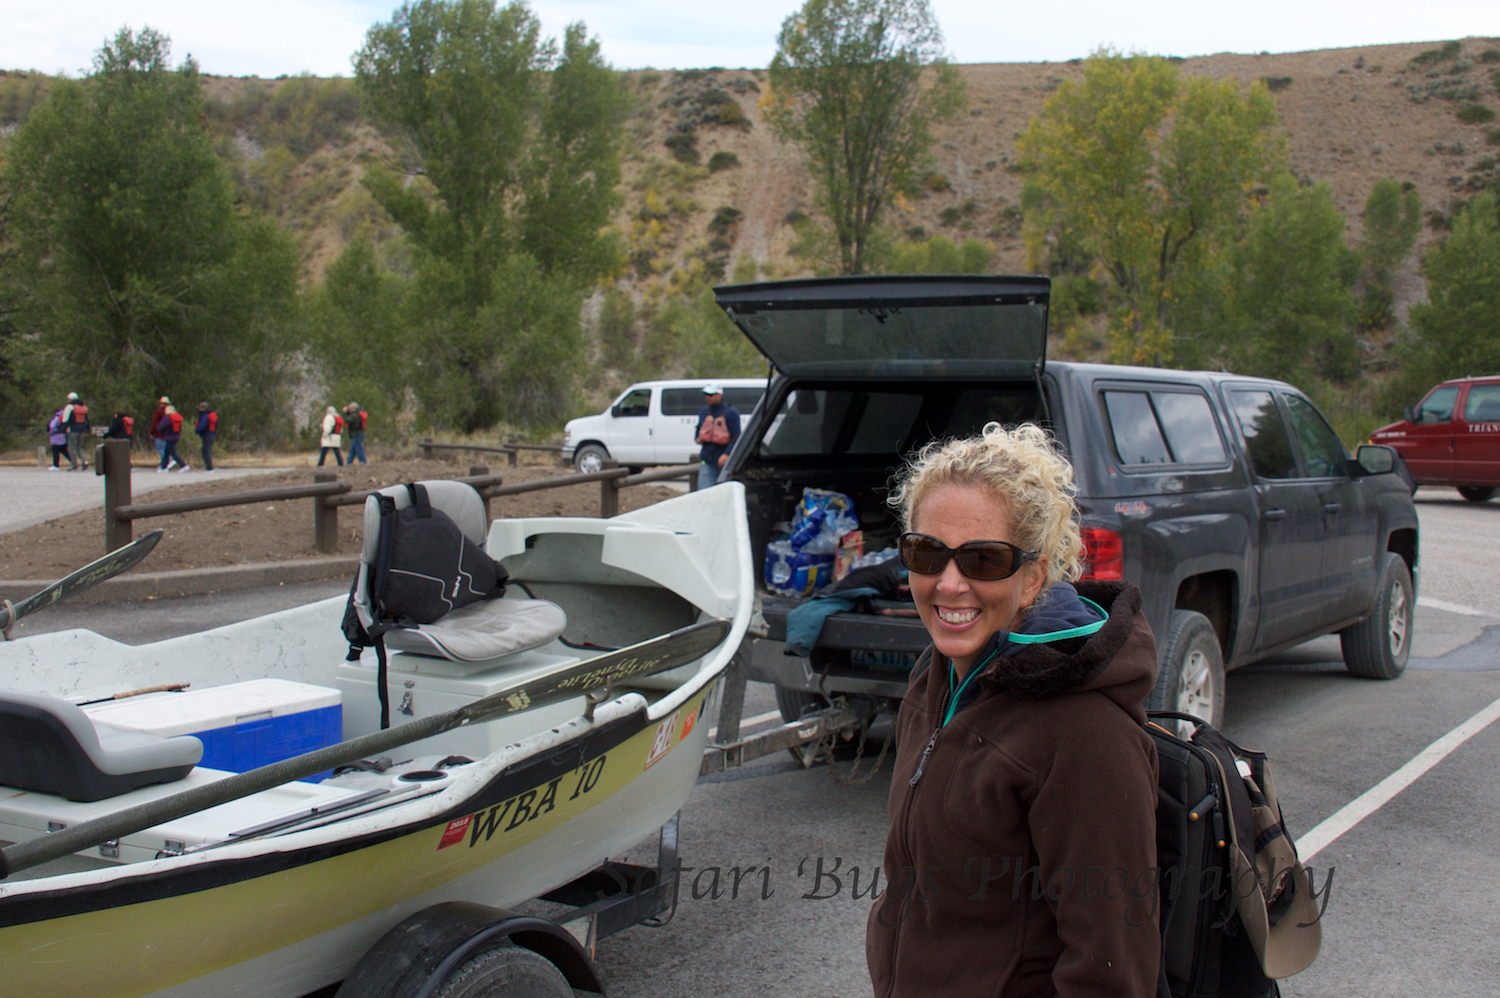  Then into Grand Teton National Park to get the boat in the river. 